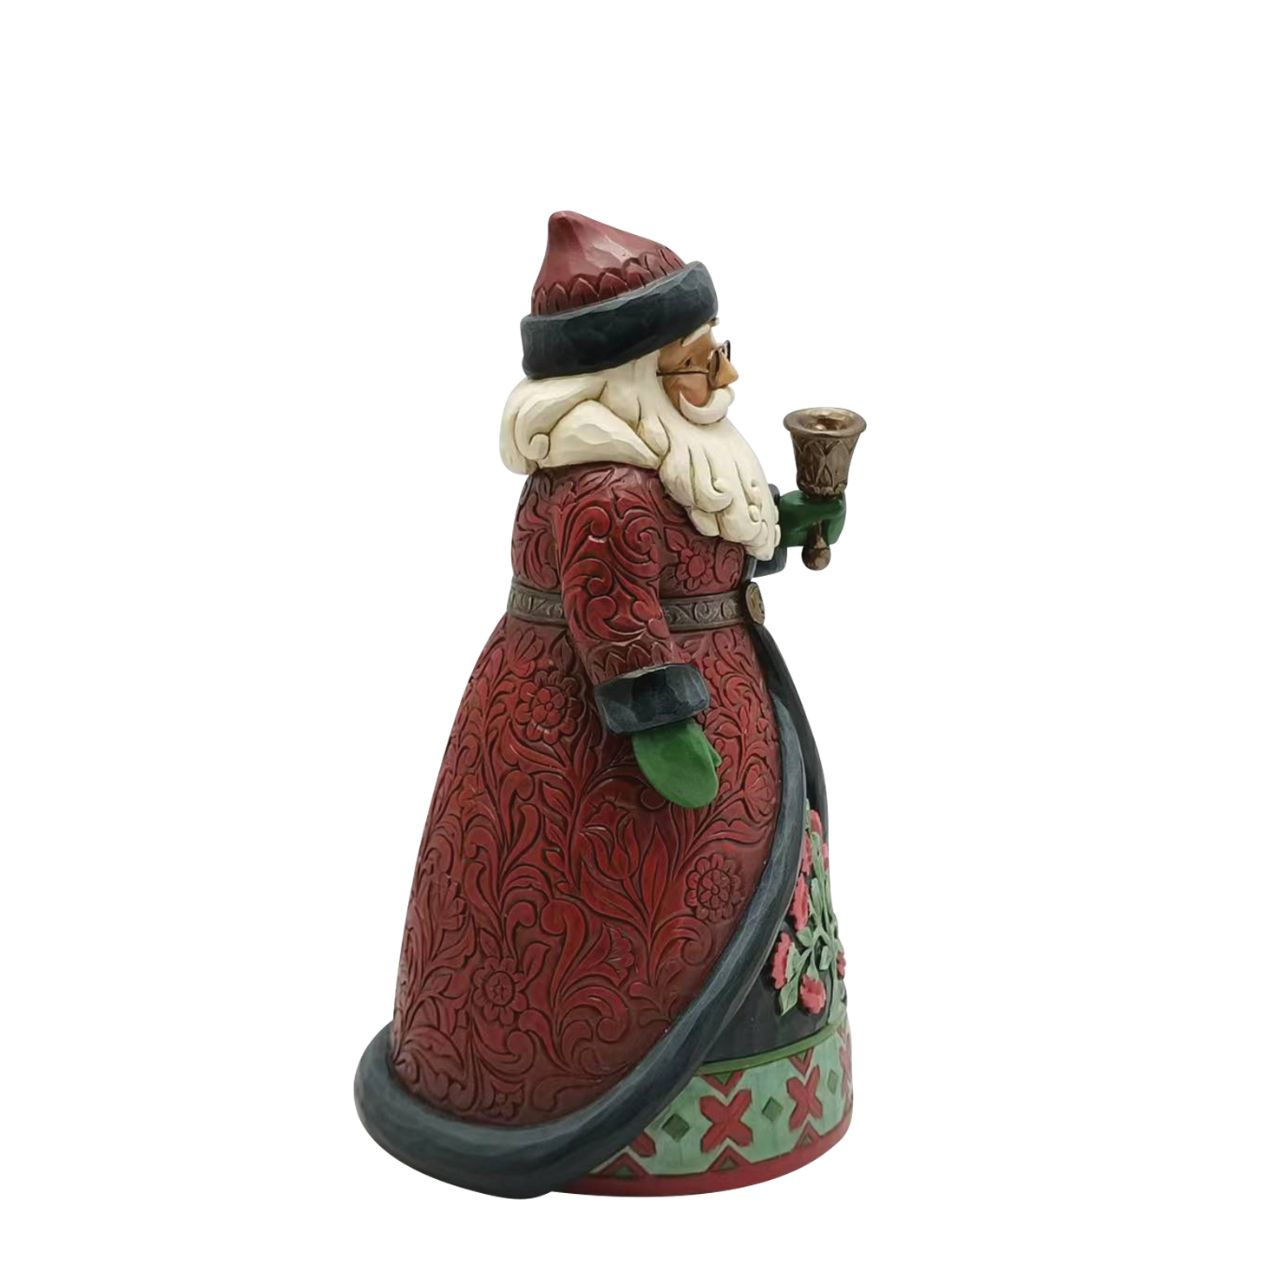 Heartwood Creek Holiday Manor Santa with Bells Figurine  Designed by award winning artist Jim Shore as part of the Heartwood Creek Holiday Manor Collection, hand crafted using high quality cast stone and hand painted, this Santa with his festive bells is perfect for the Christmas season.